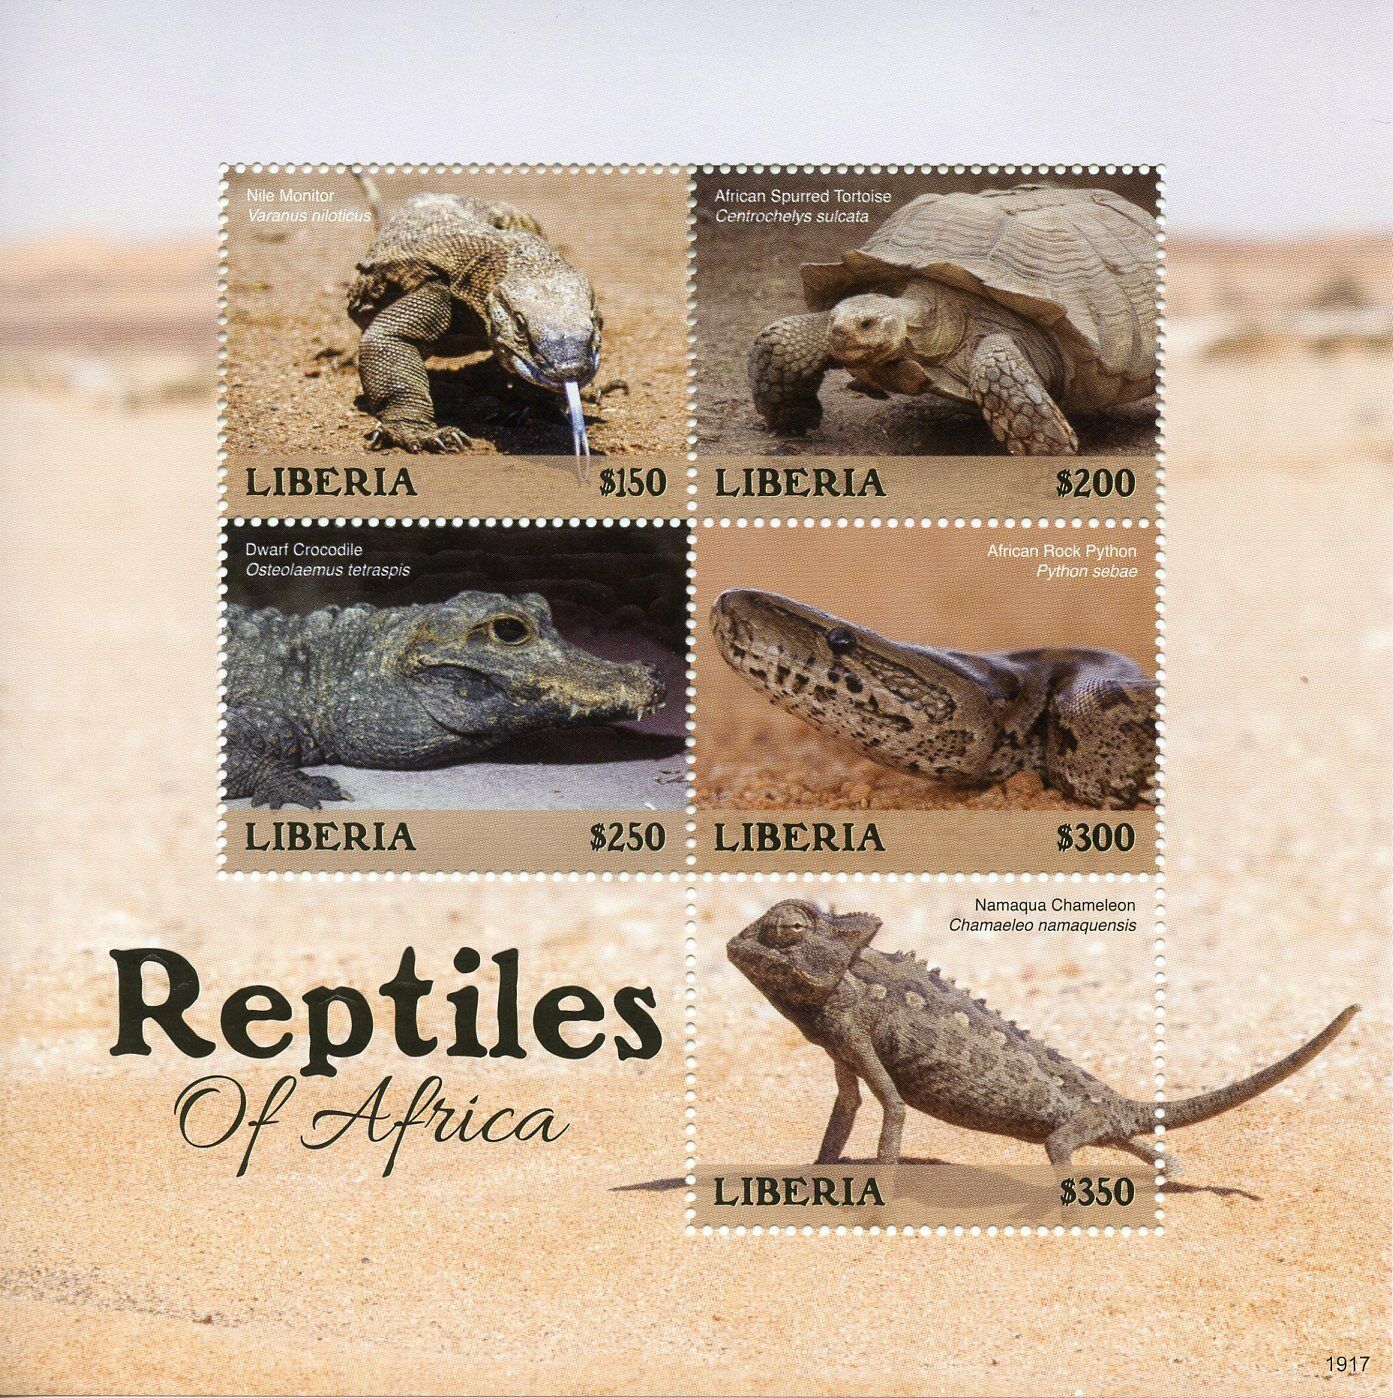 Liberia 2019 MNH Reptiles of Africa 5v M/S Snakes Lizards Turtles Stamps